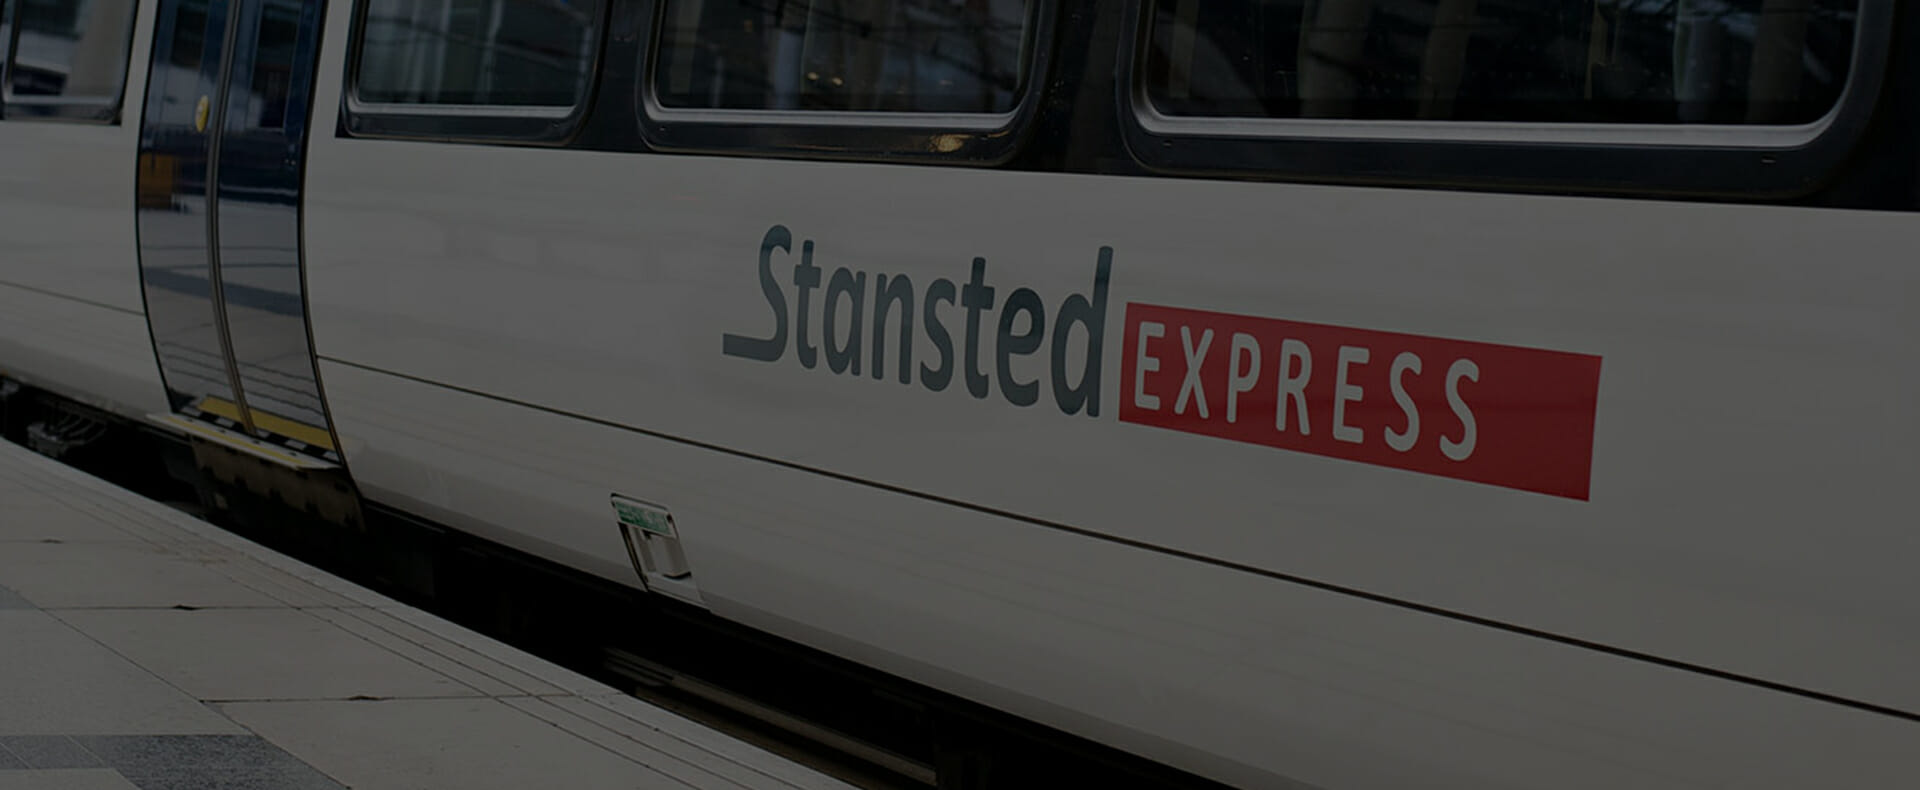 white stansted express train